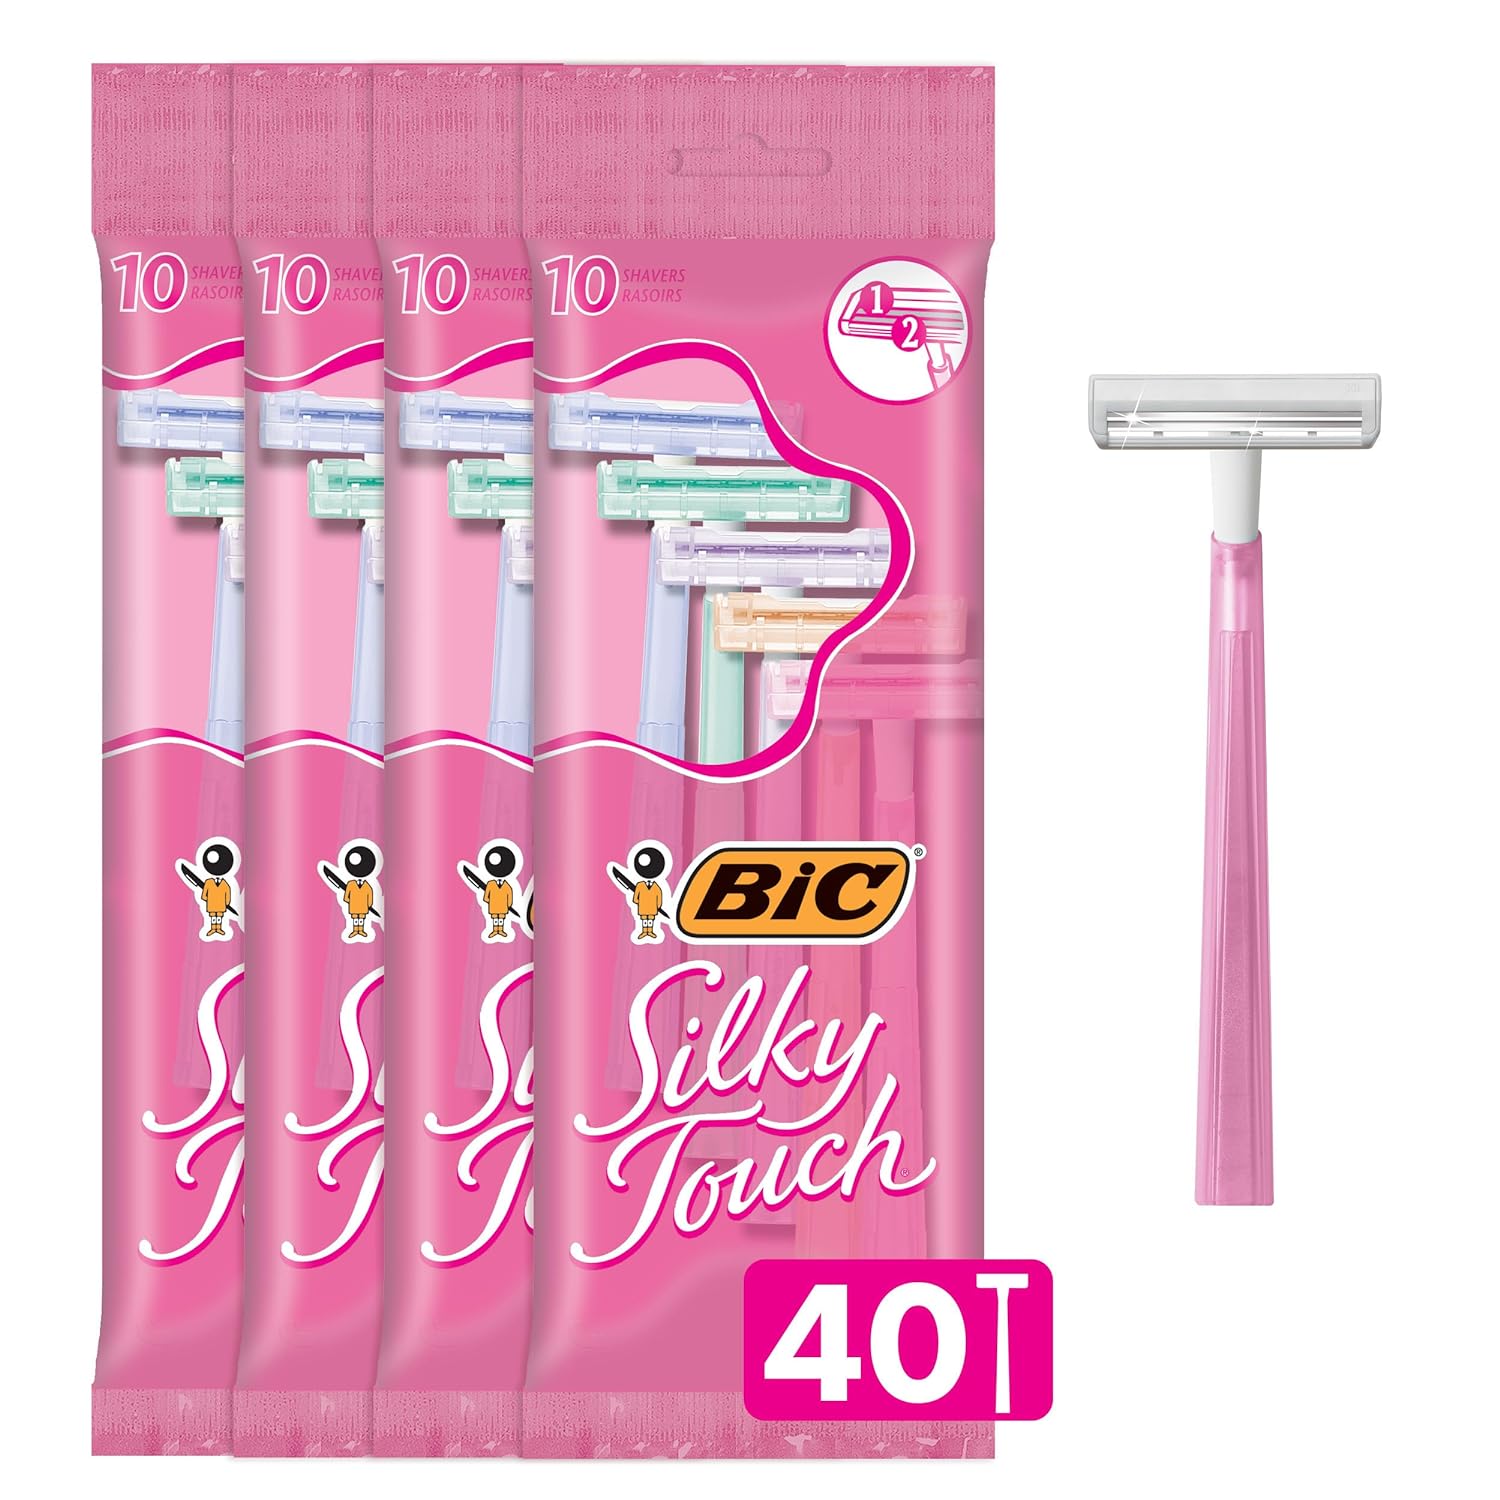 BIC Silky Touch Women' Disposable Razors, With 2 Blades, Pretty Pastel Razor Handles, 40 Count Value Pack of Shaving Razors